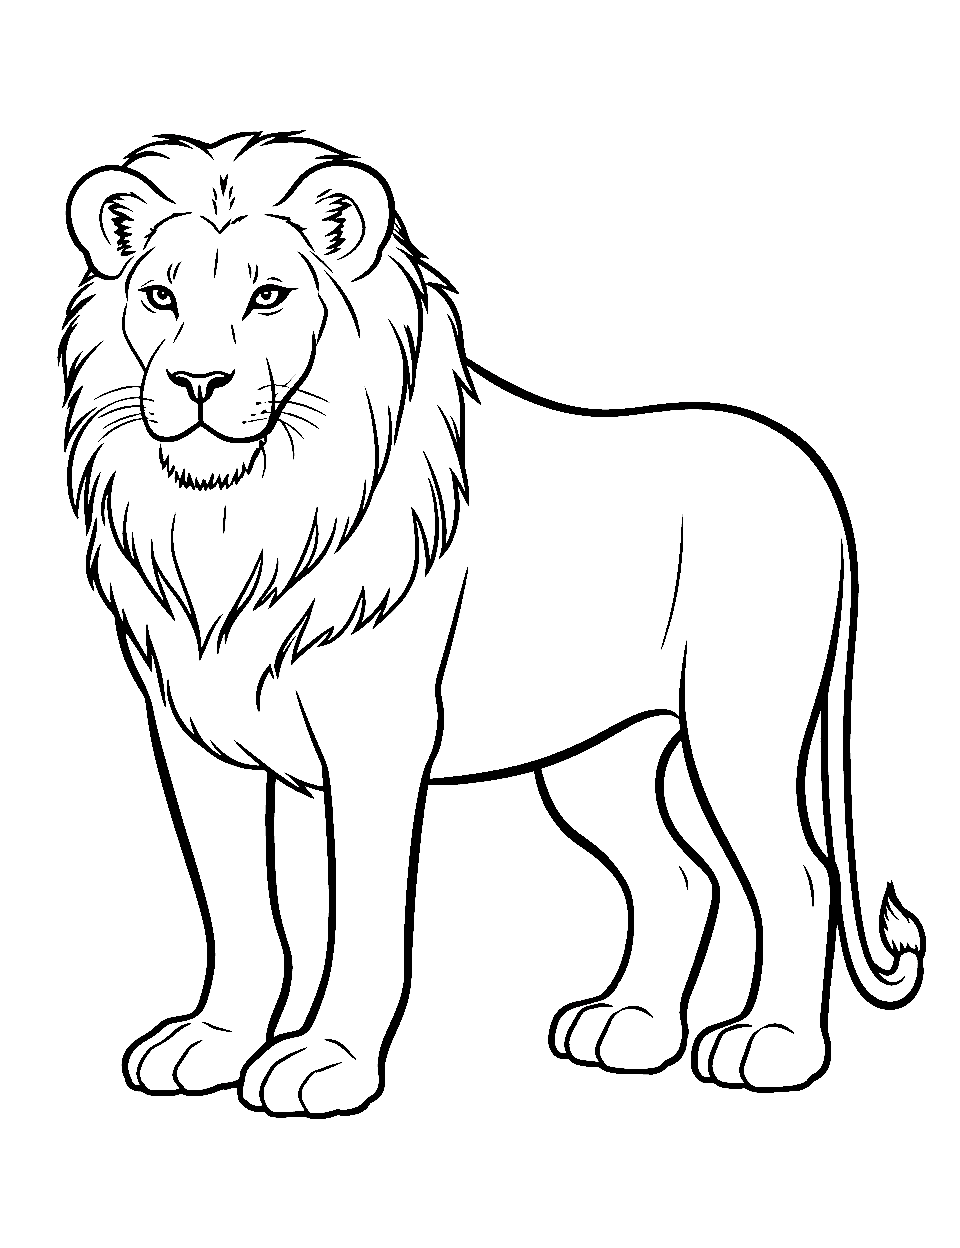 Realistic Lion Stance Coloring Page - An African lion standing proudly.